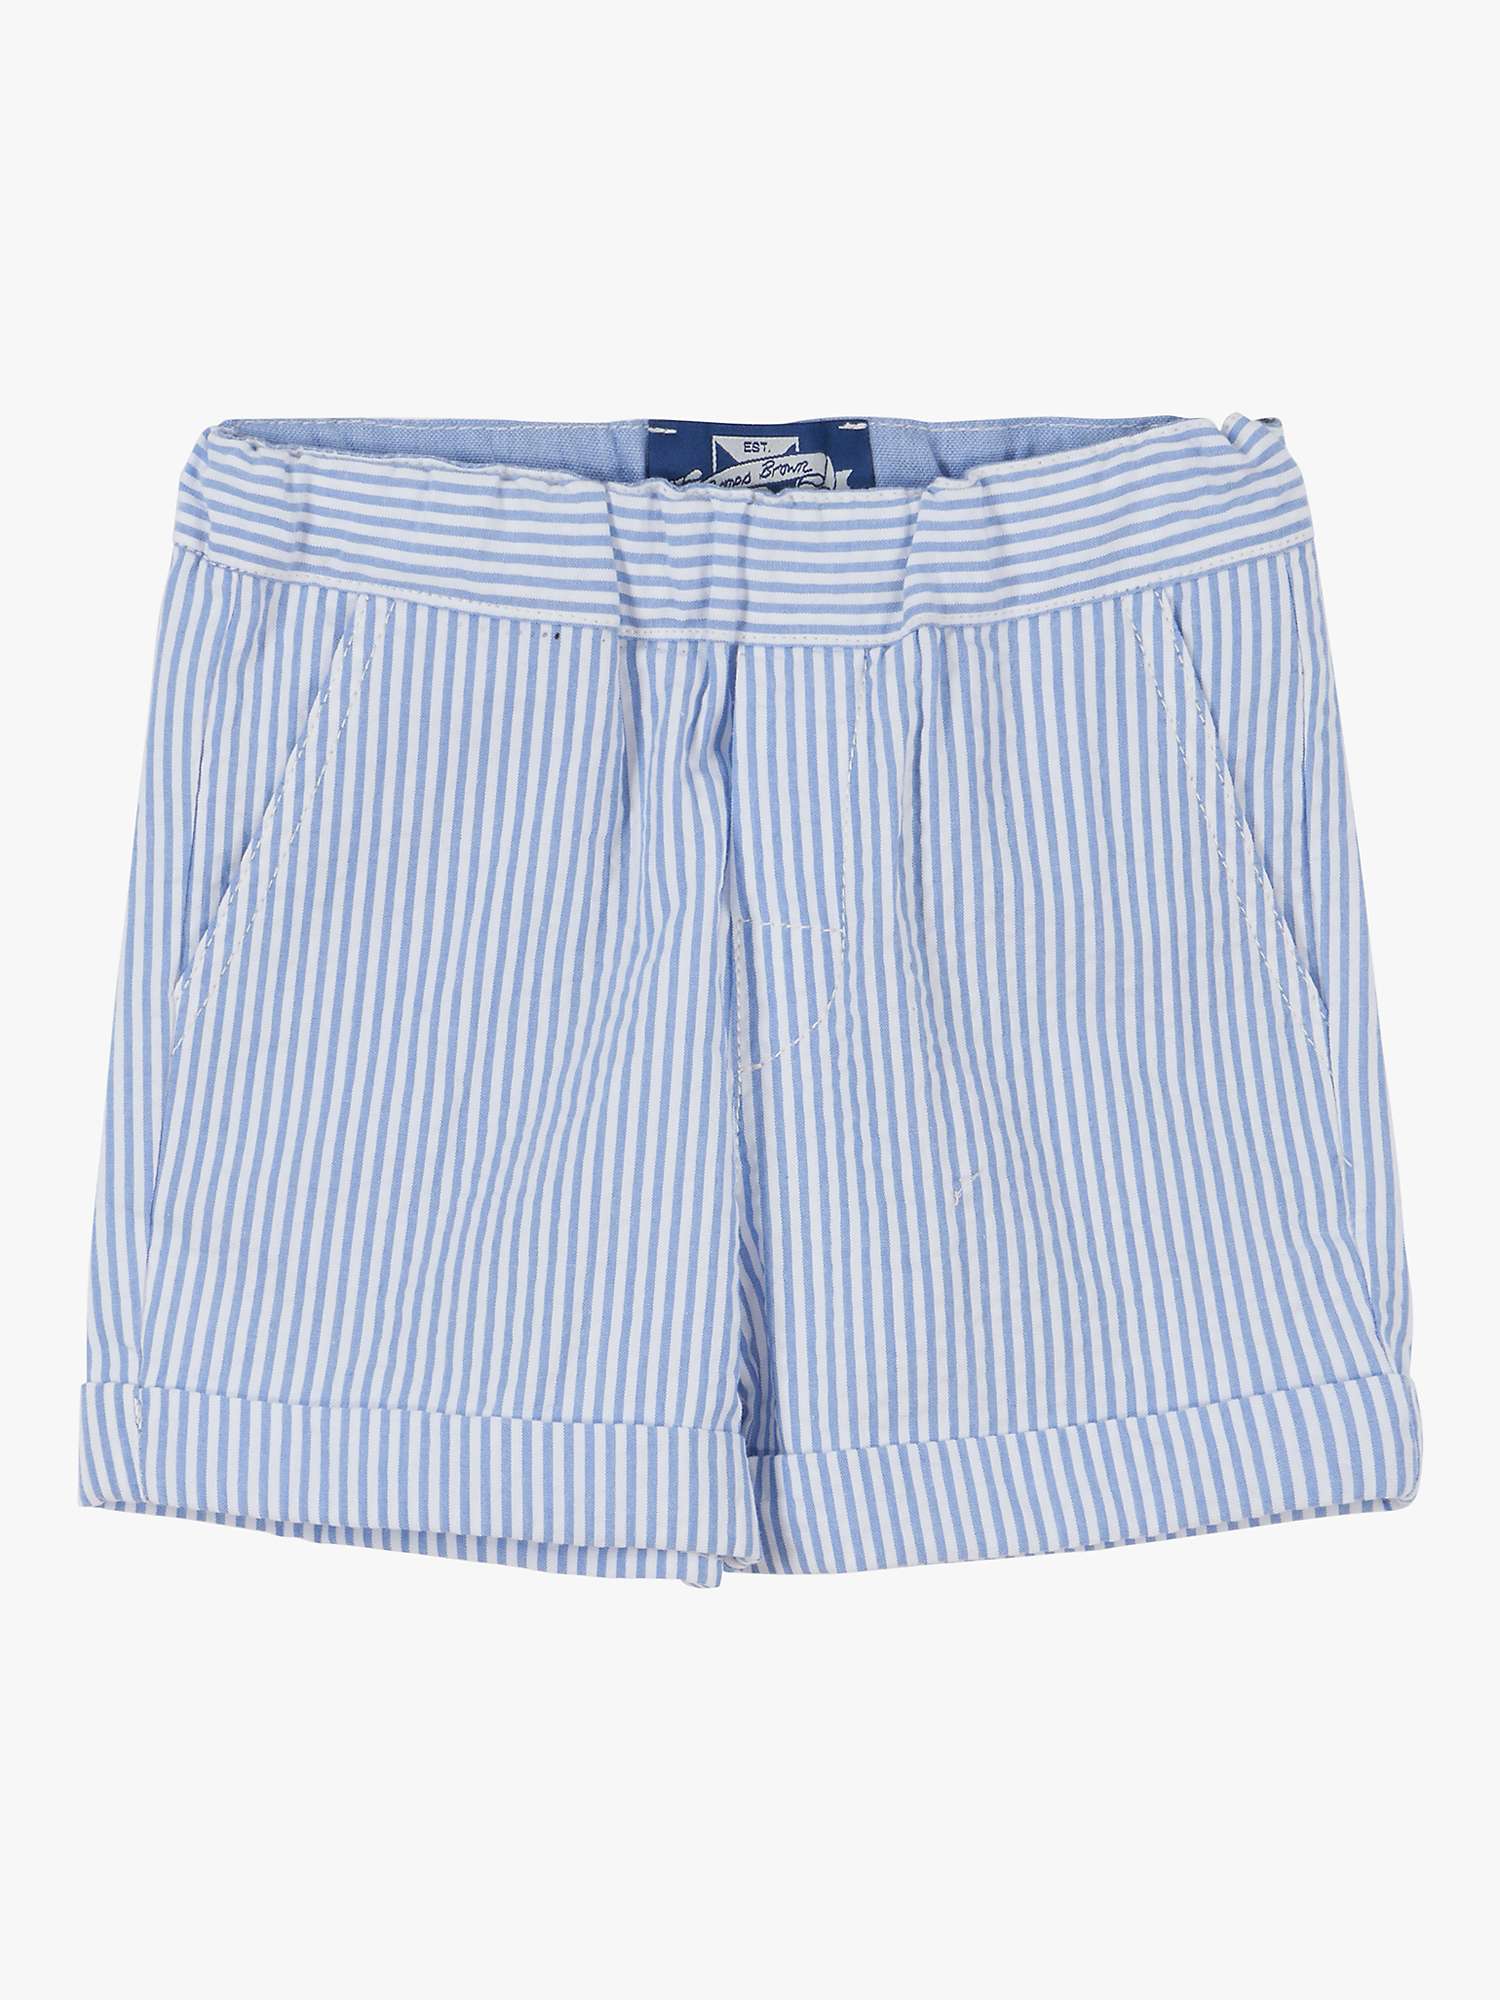 Buy Trotters Baby Charlie Stripe Pull Up Shorts, Blue Online at johnlewis.com